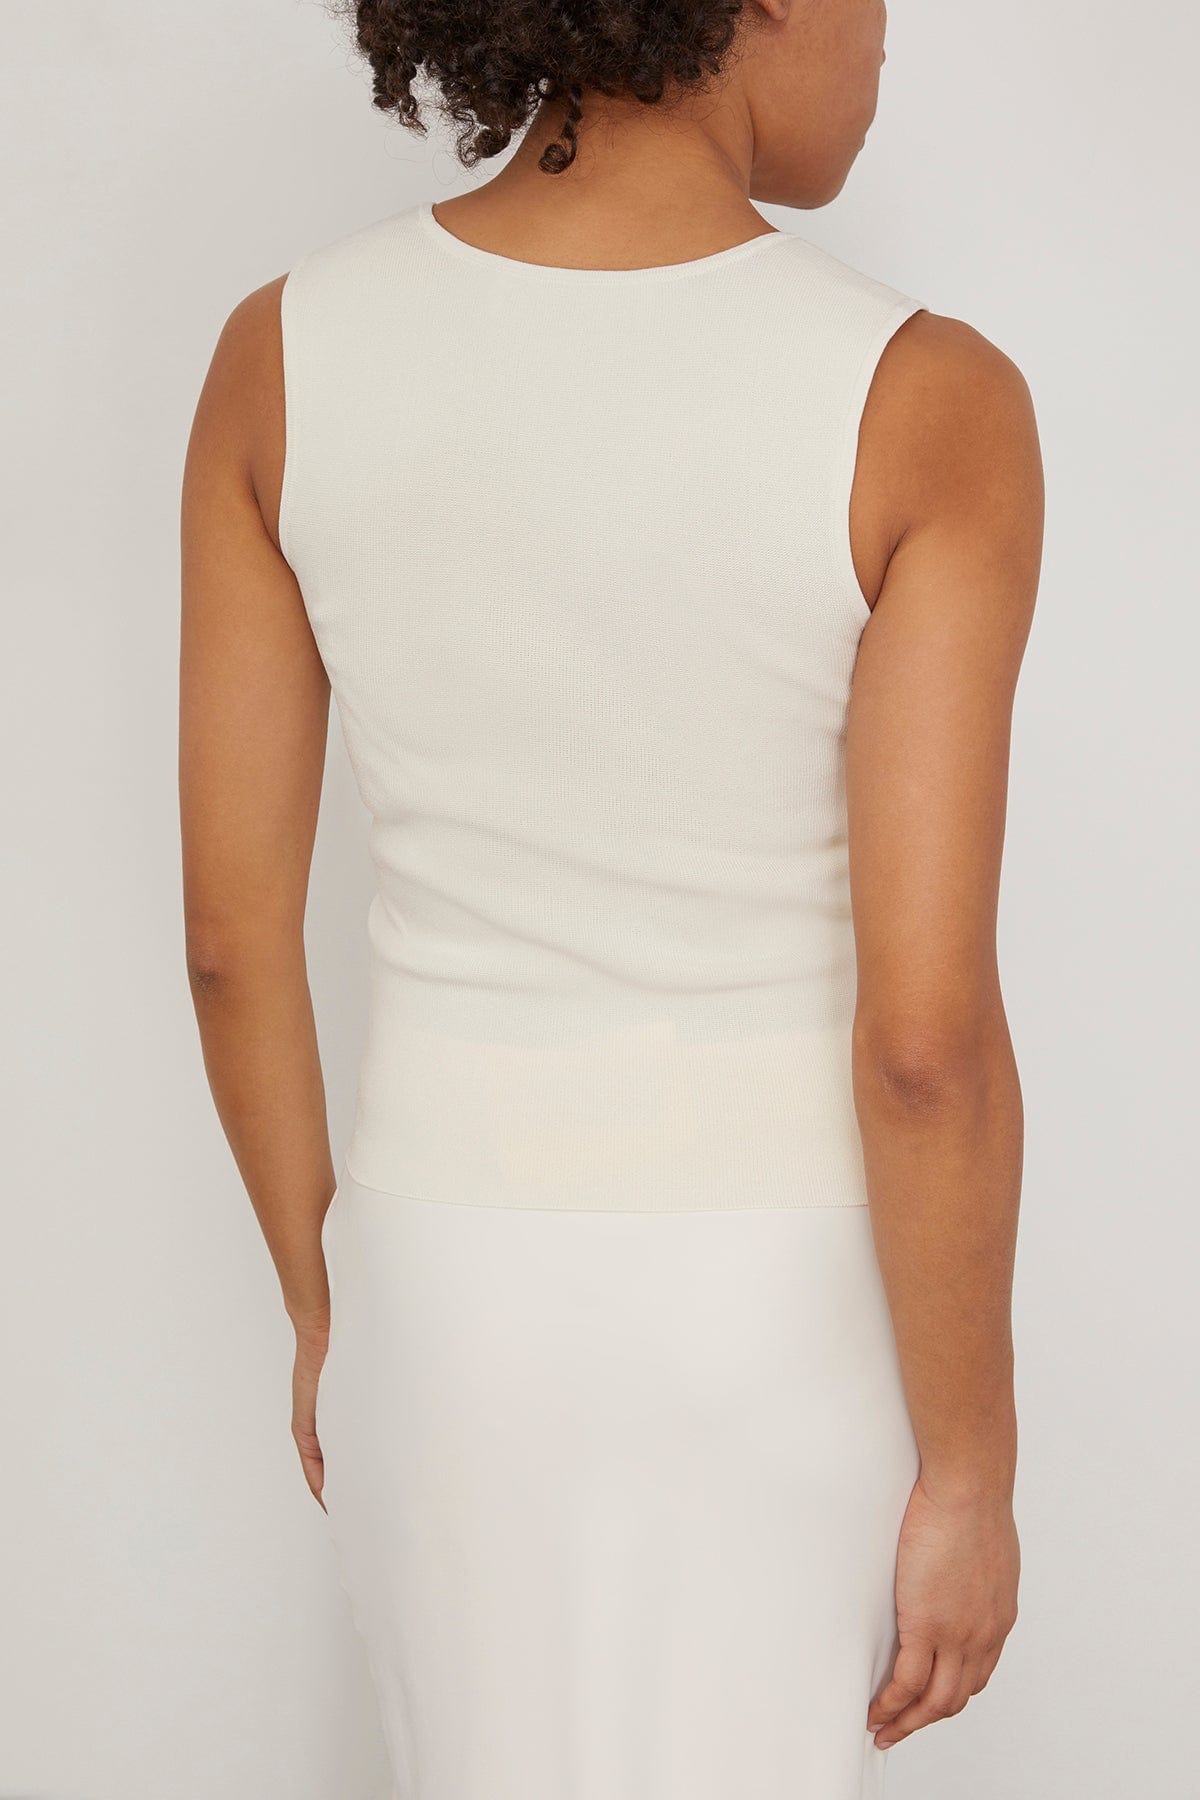 Rohe Tops Bustier-Shaped Knitted Tank Top in Off White Rohe Bustier-Shaped Knitted Tank Top in Off White